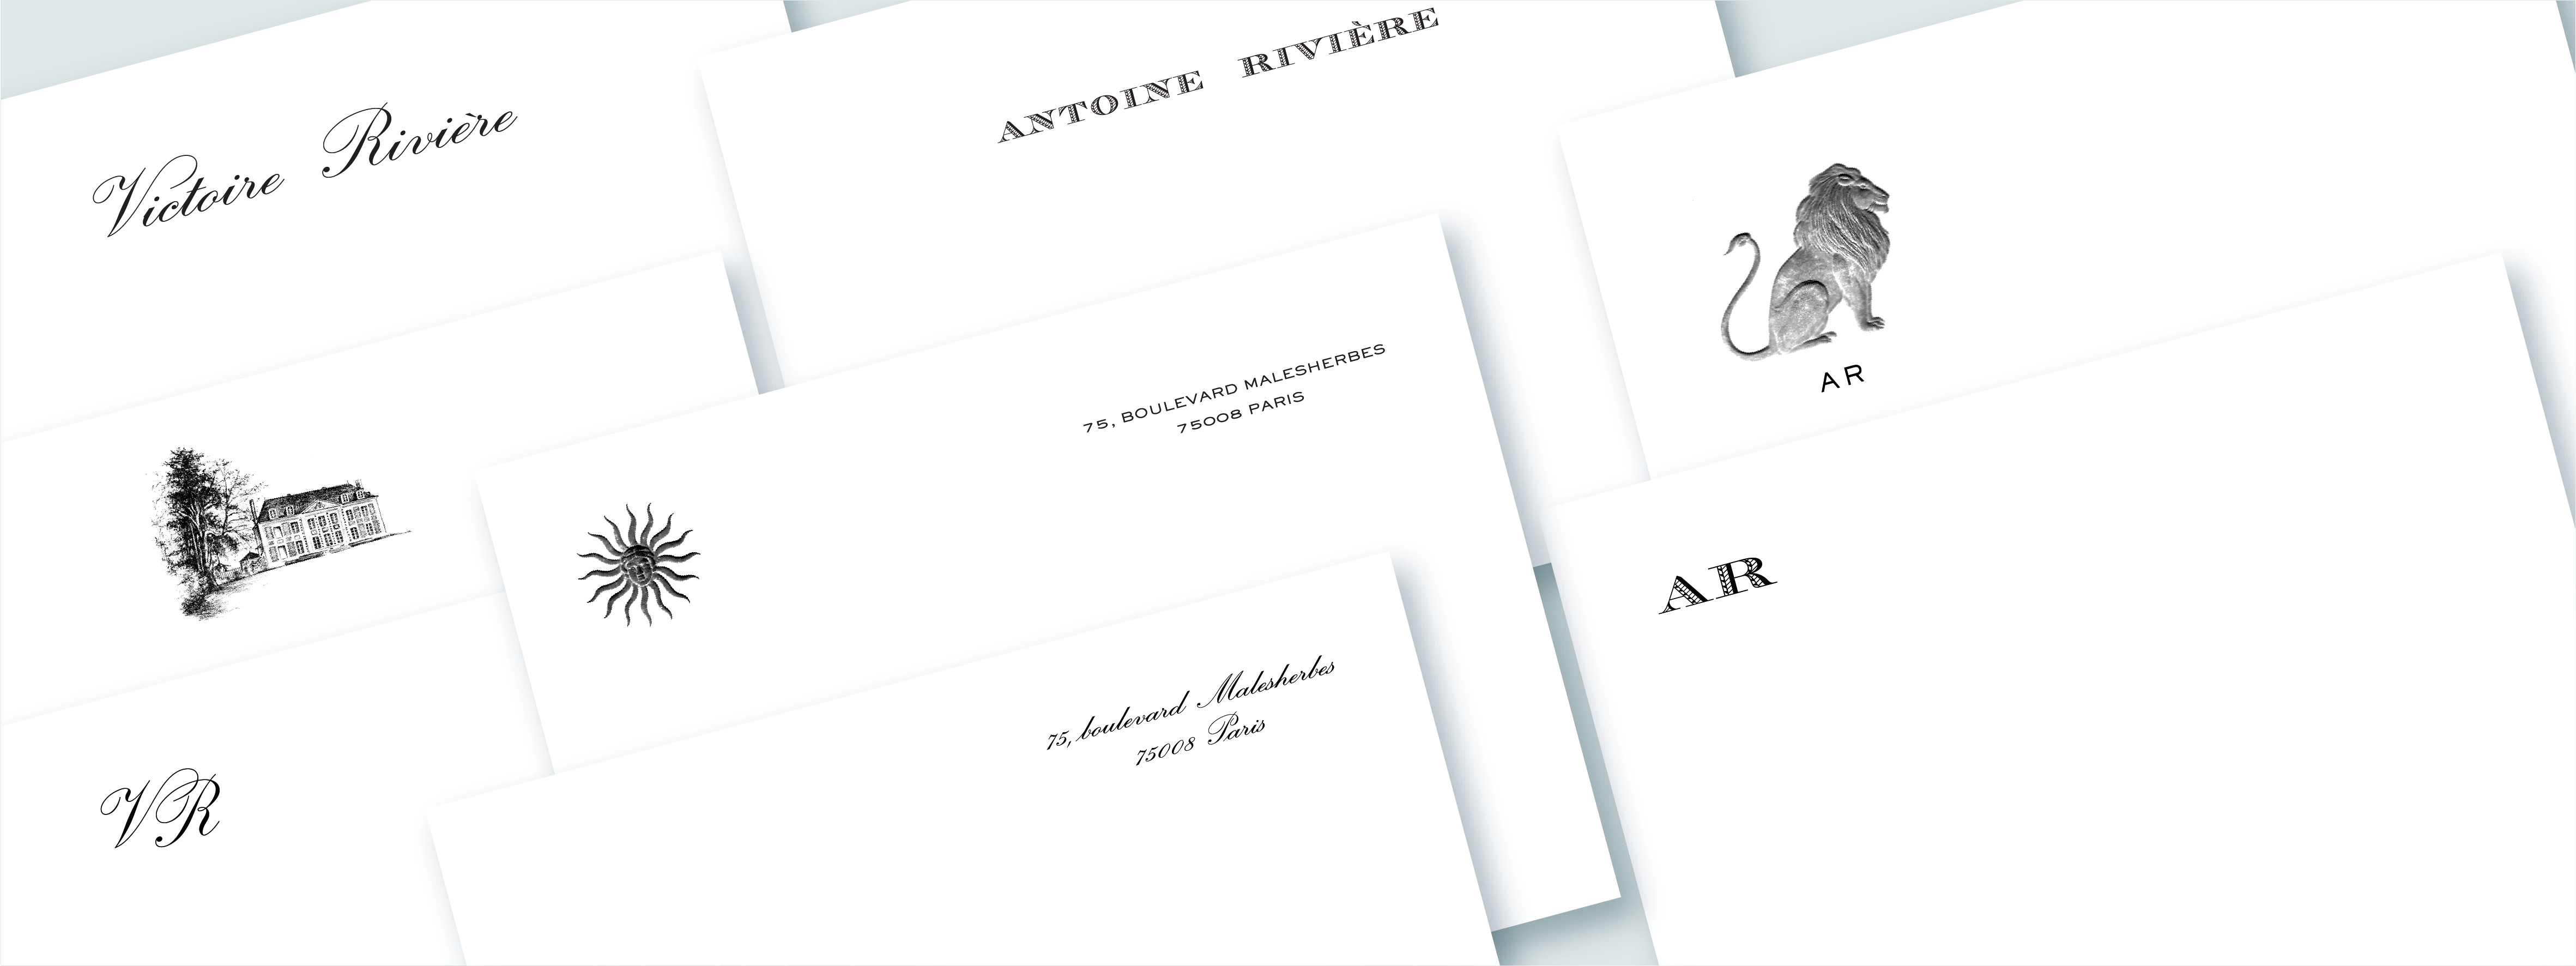 Correspondence card and personalised engraving Benneton Graveur